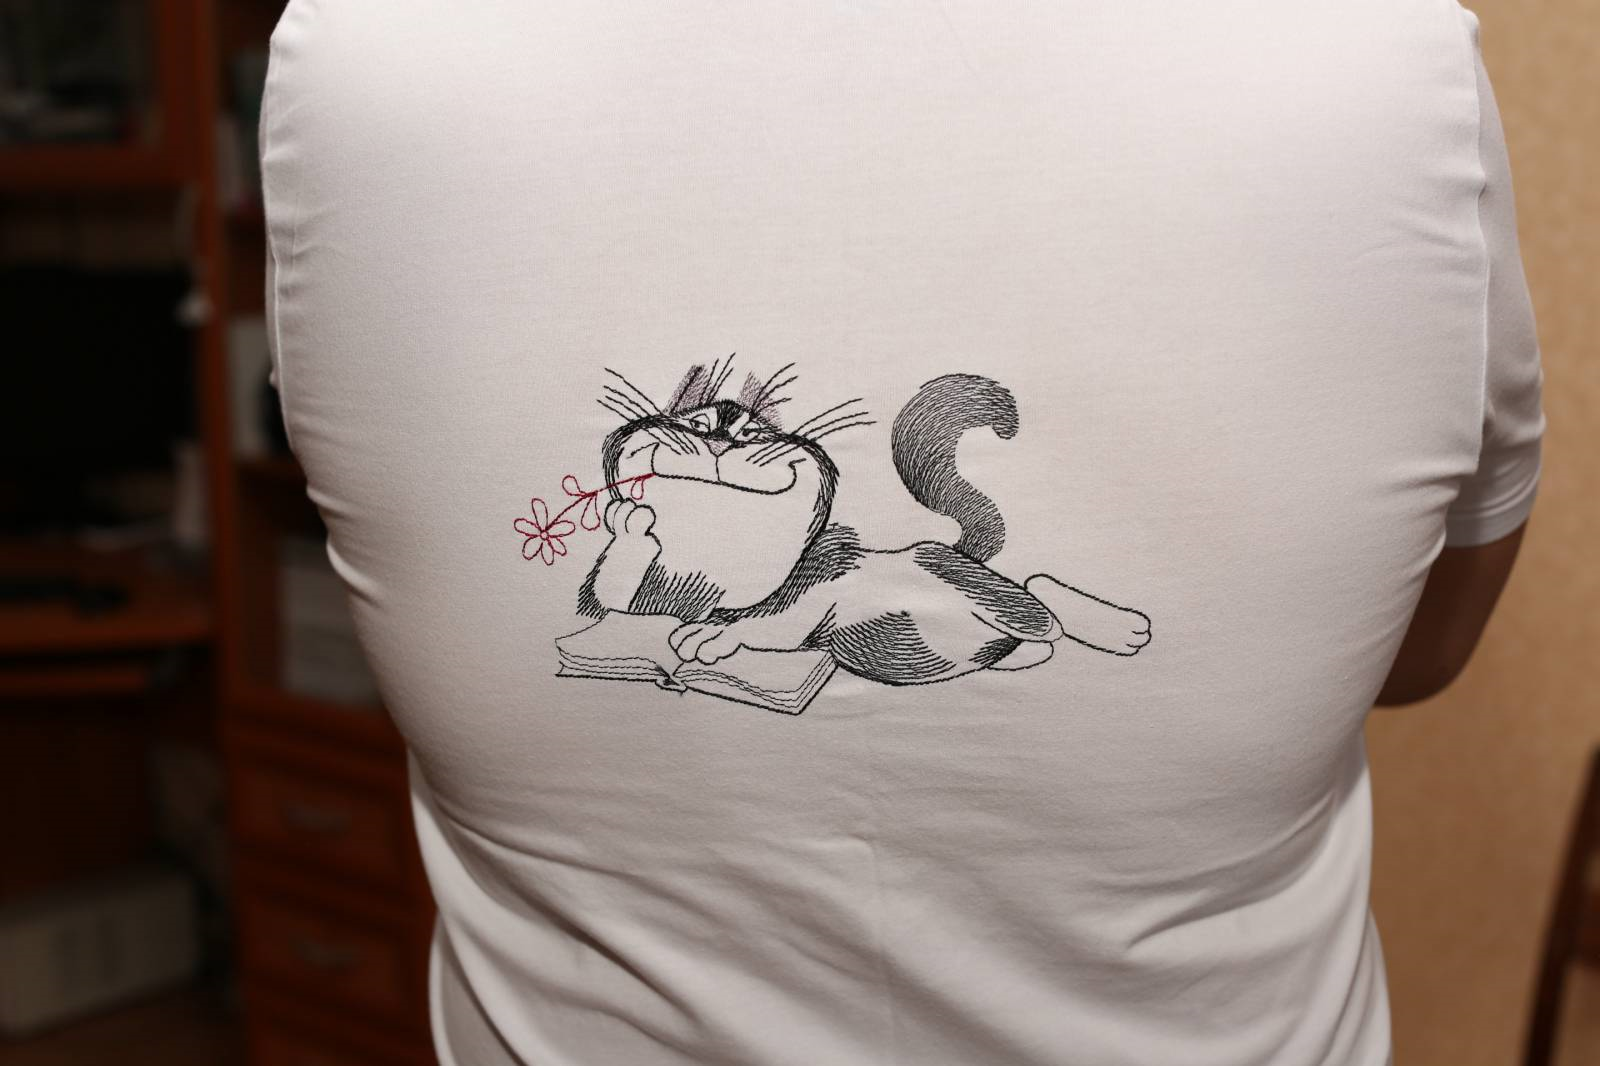 Cheerful cat on the T-shirt free embroidery design